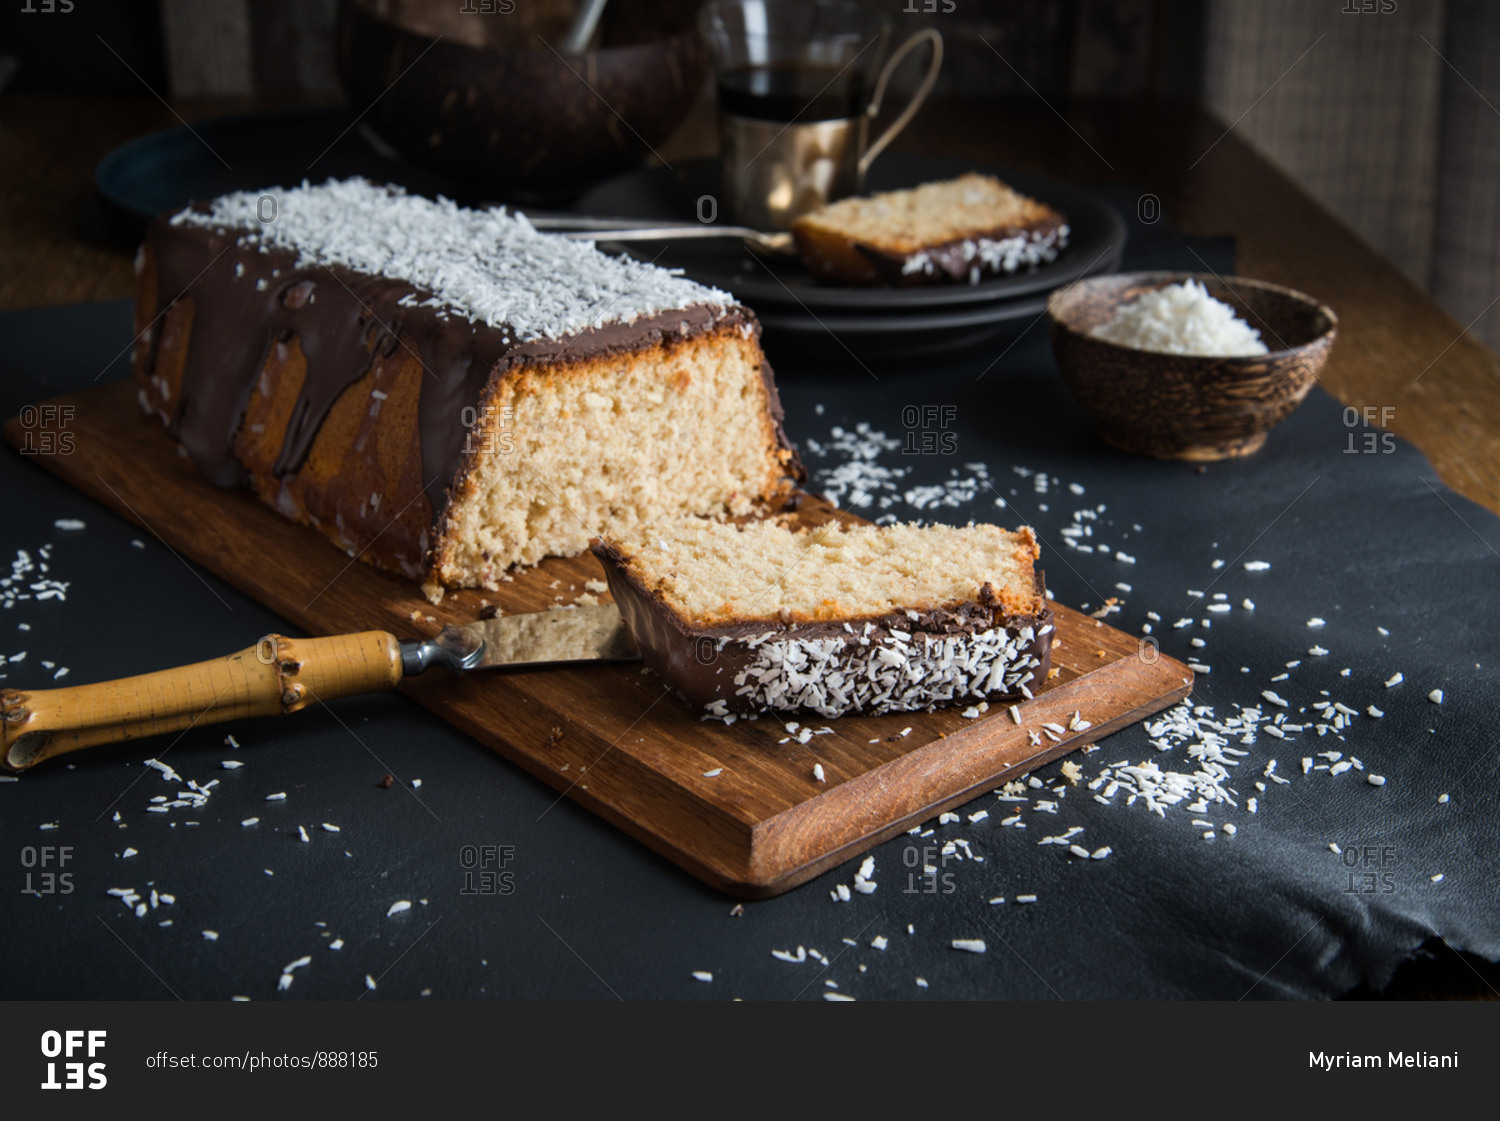 A coconut pound cake glazed with chocolate and coconut rasp sliced and ready to be shared